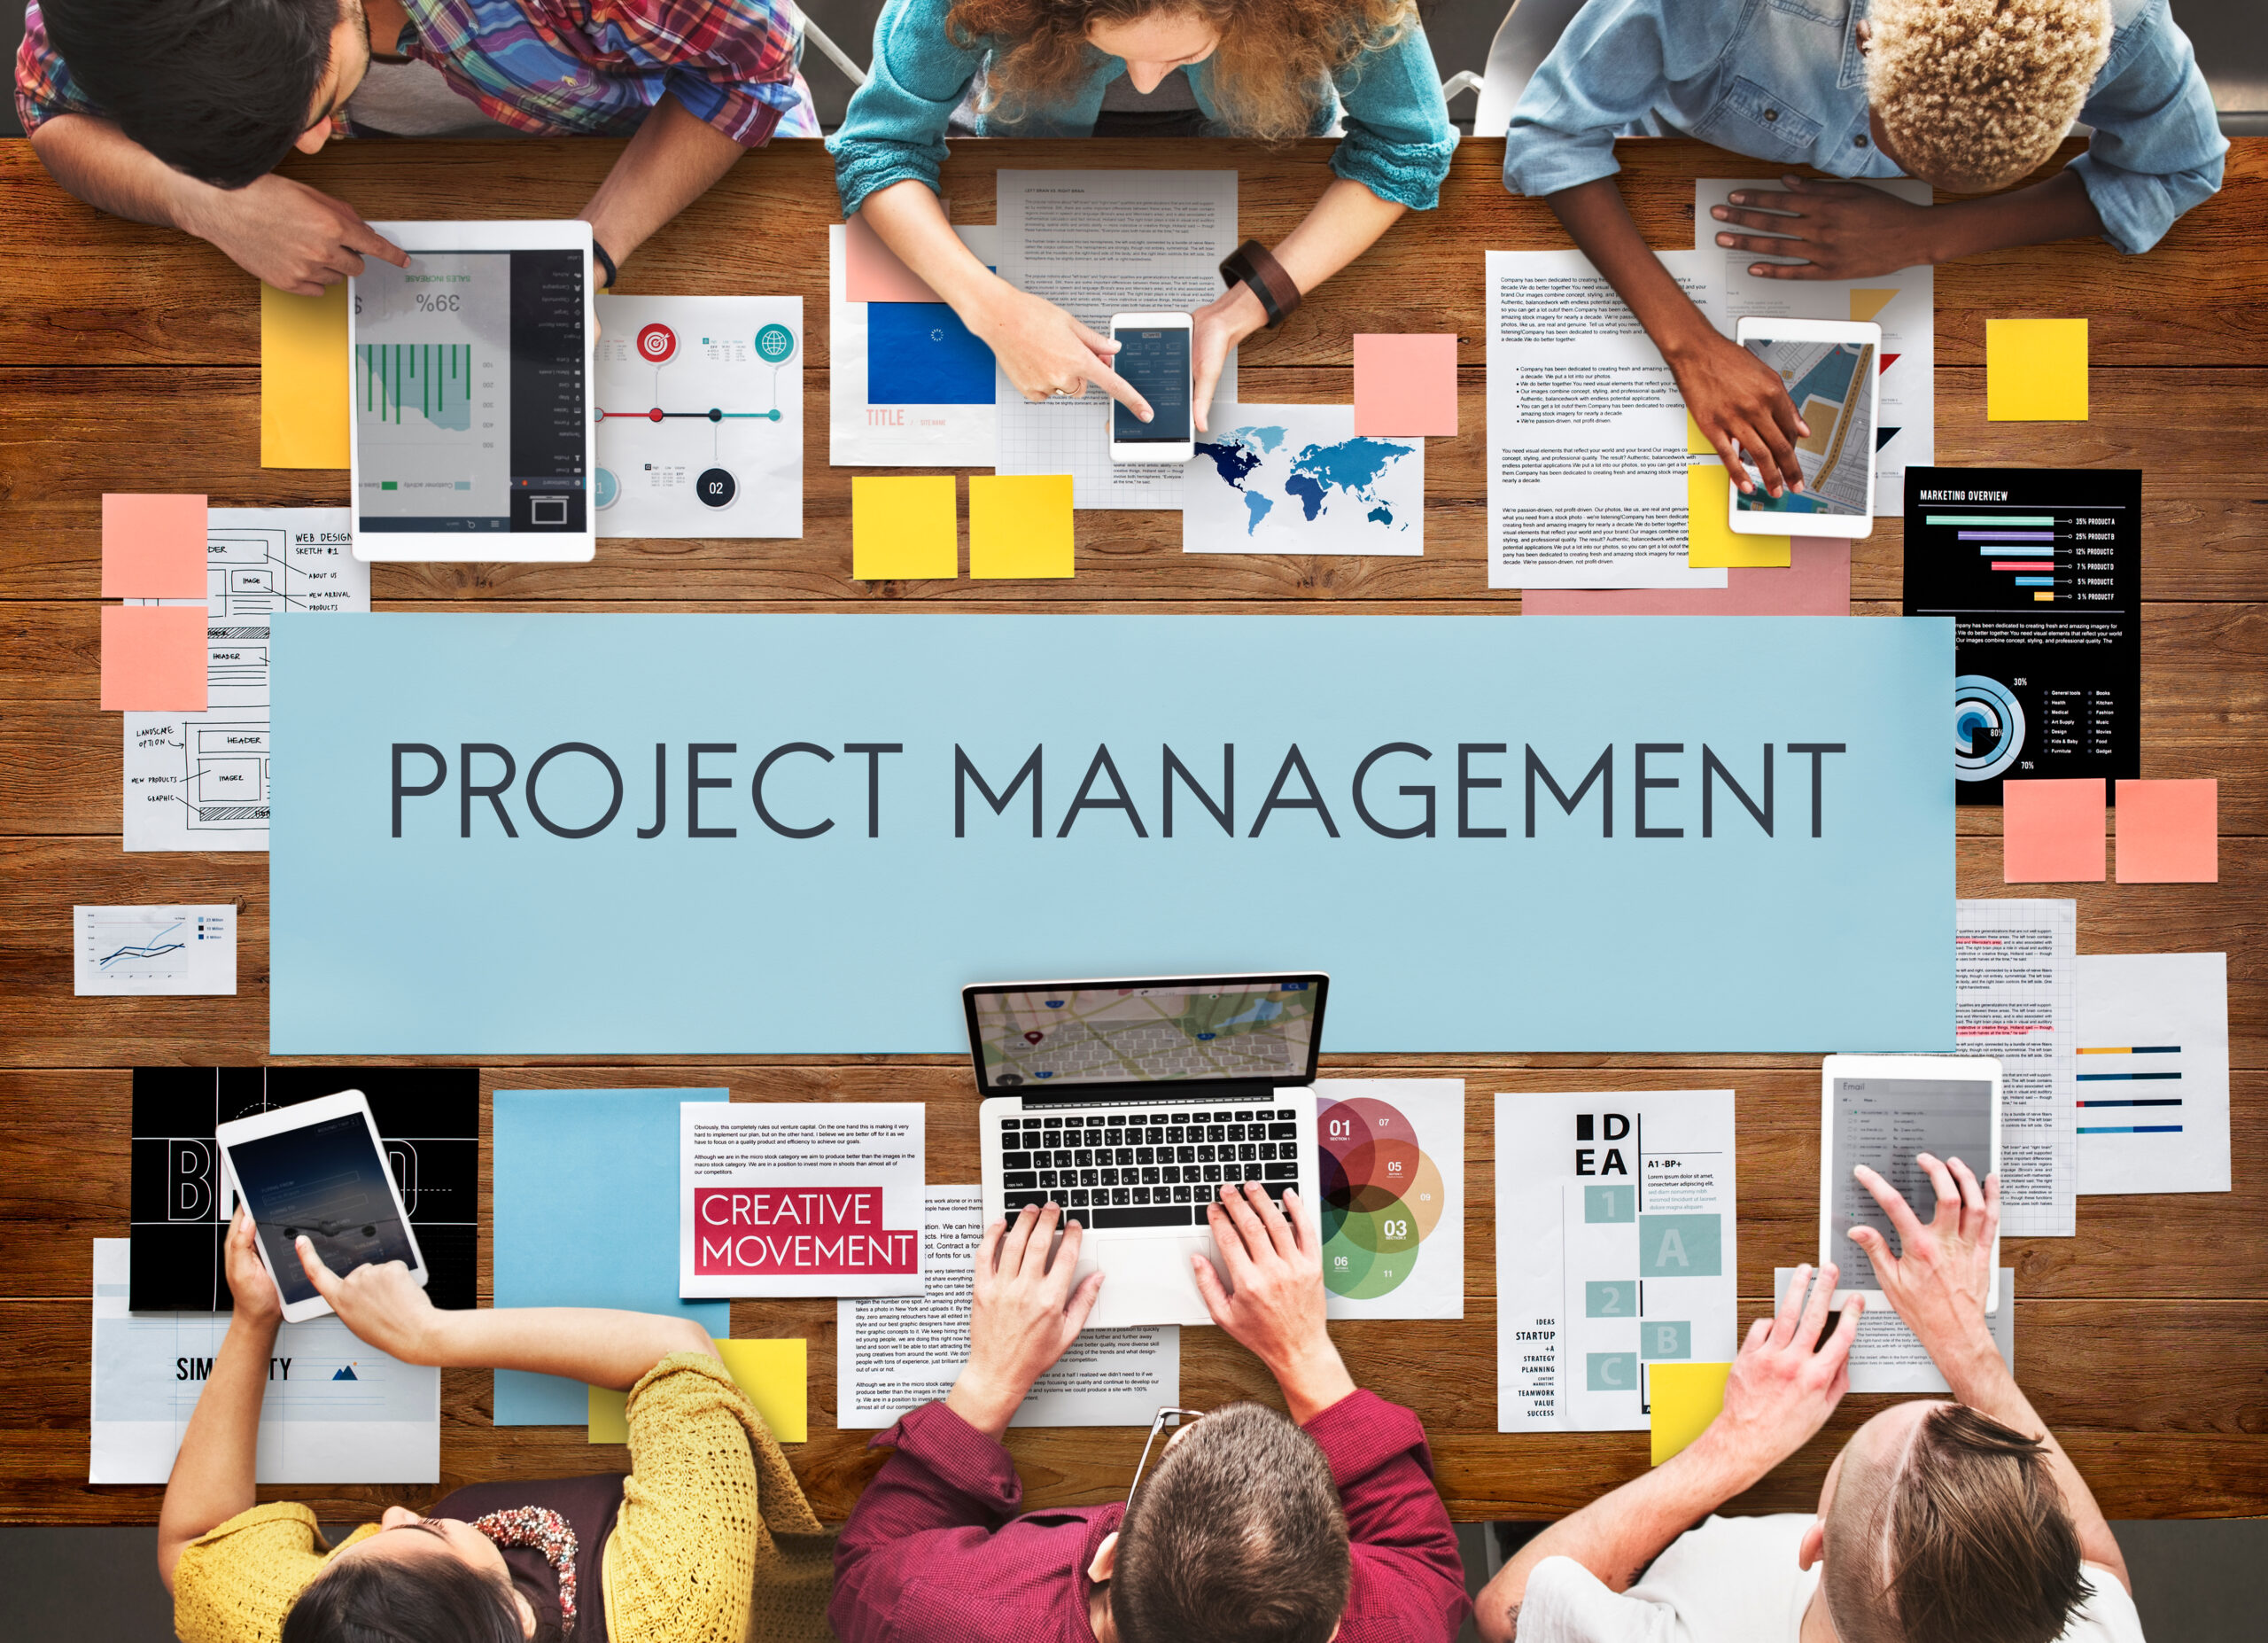 Top SharePoint Benefits - Project Management 